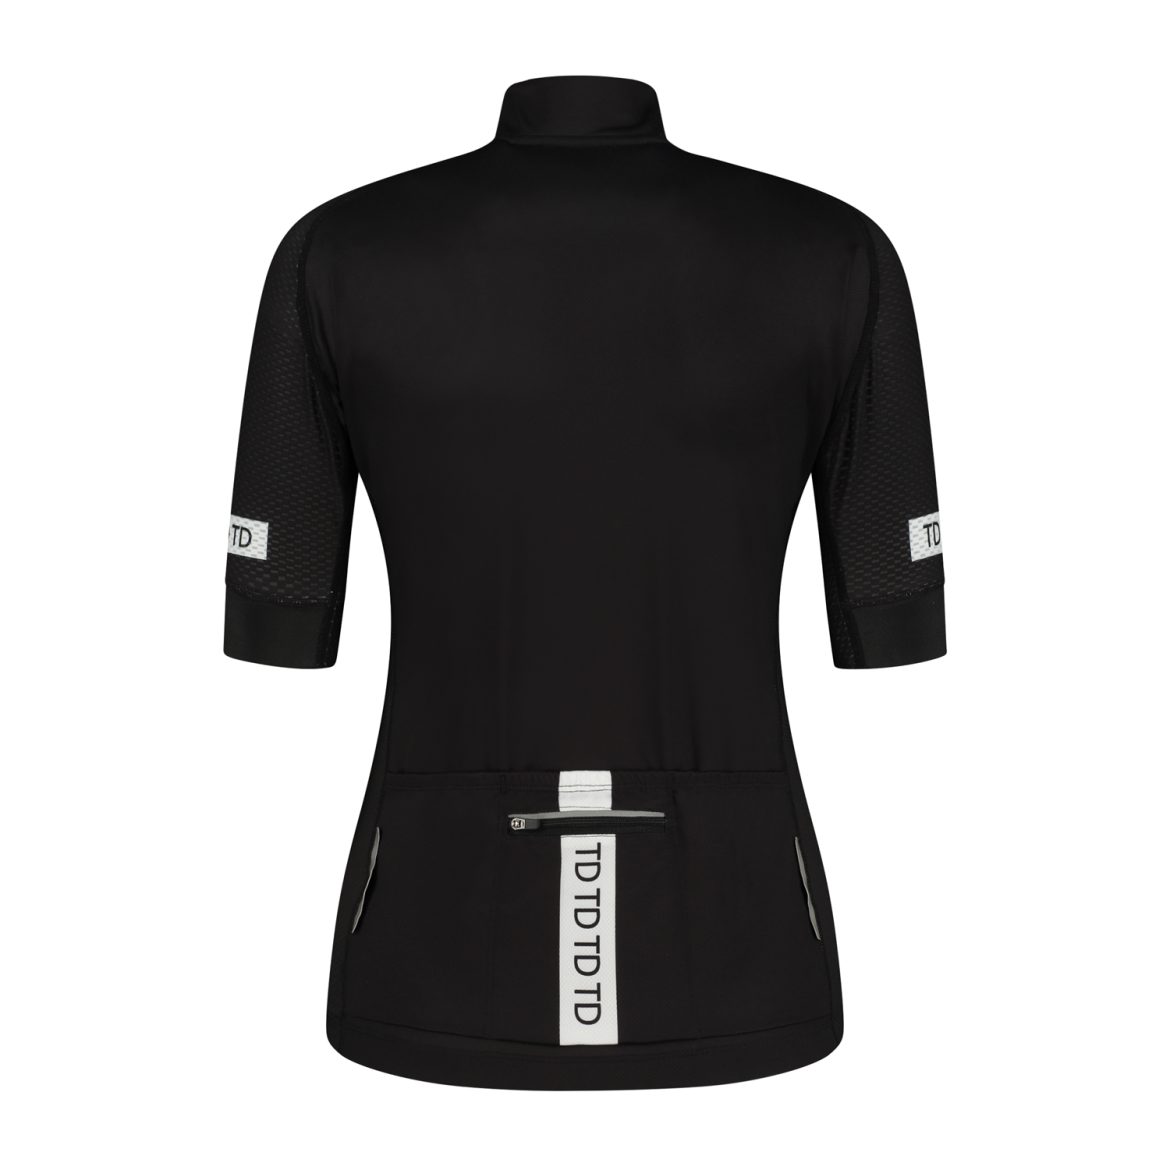 Ladies cycling jersey back side short sleeves black color from TD